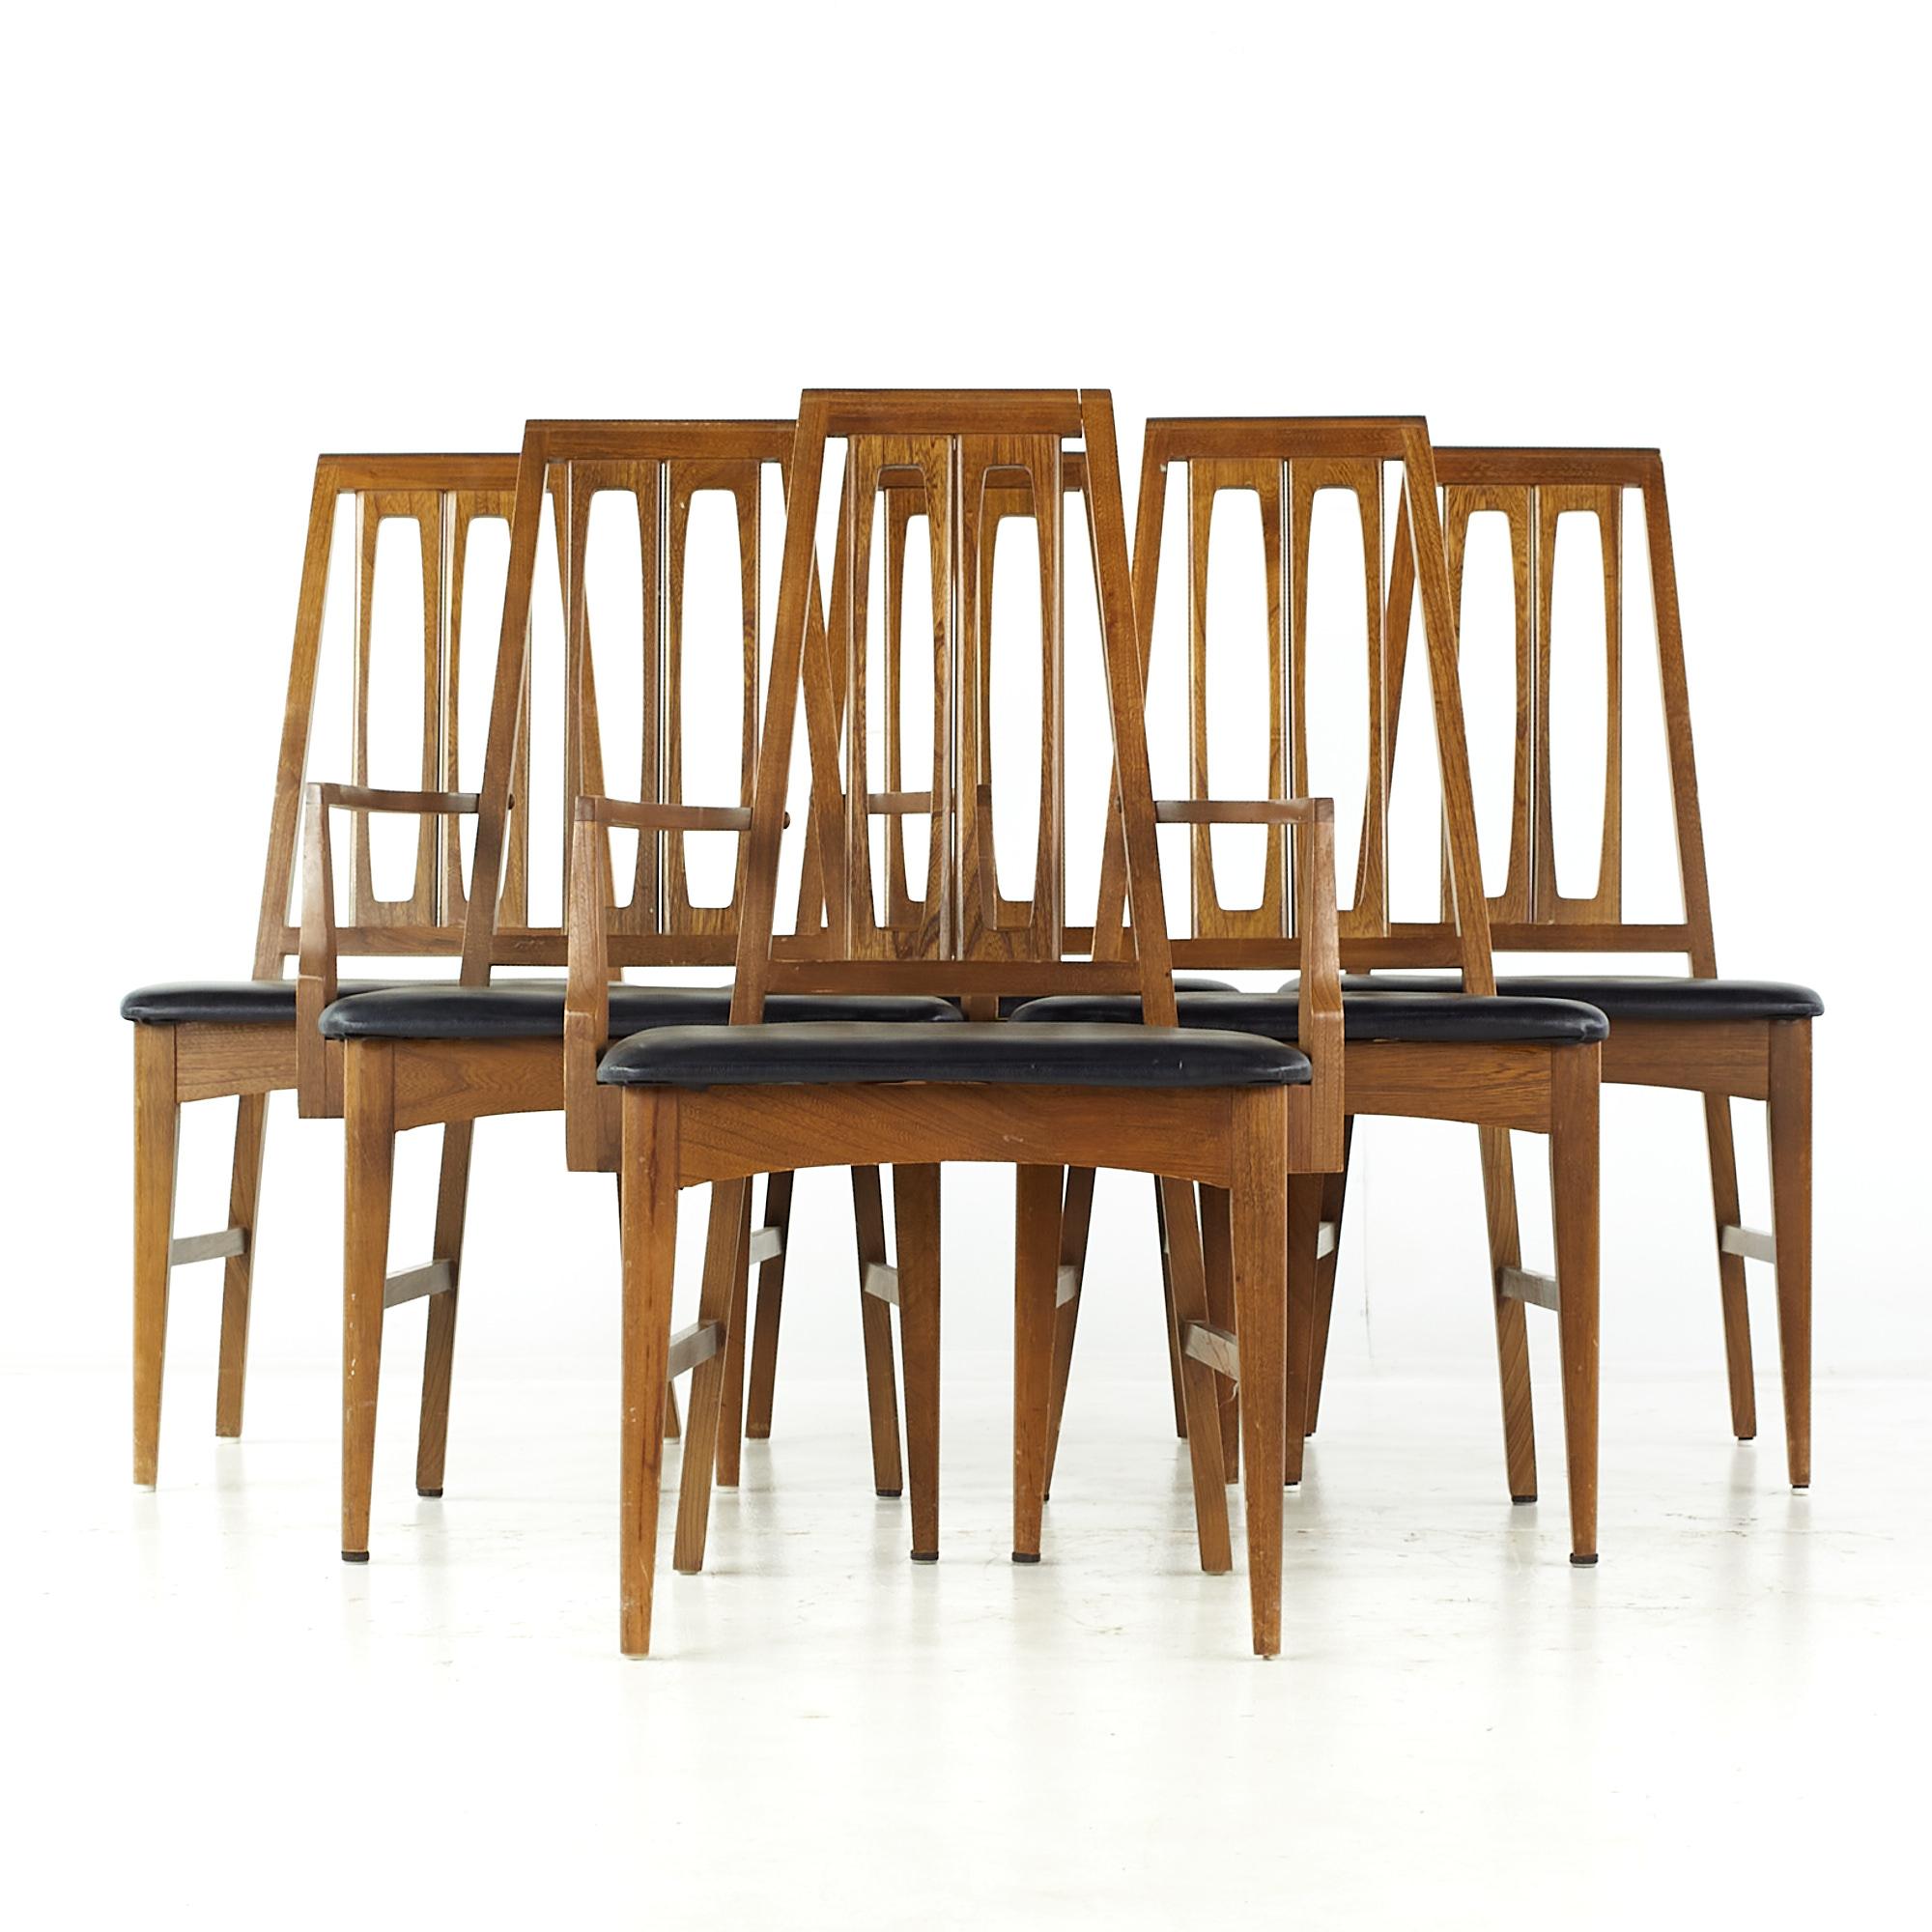 Young Manufacturing mid century walnut dining chairs - set of 6

Each armless chair measures: 19.5 wide x 20 deep x 38.25 high, with a seat height of 18.5 inches
Each captains chair measures: 22.75 wide x 22 deep x 38.25 high, with a seat height